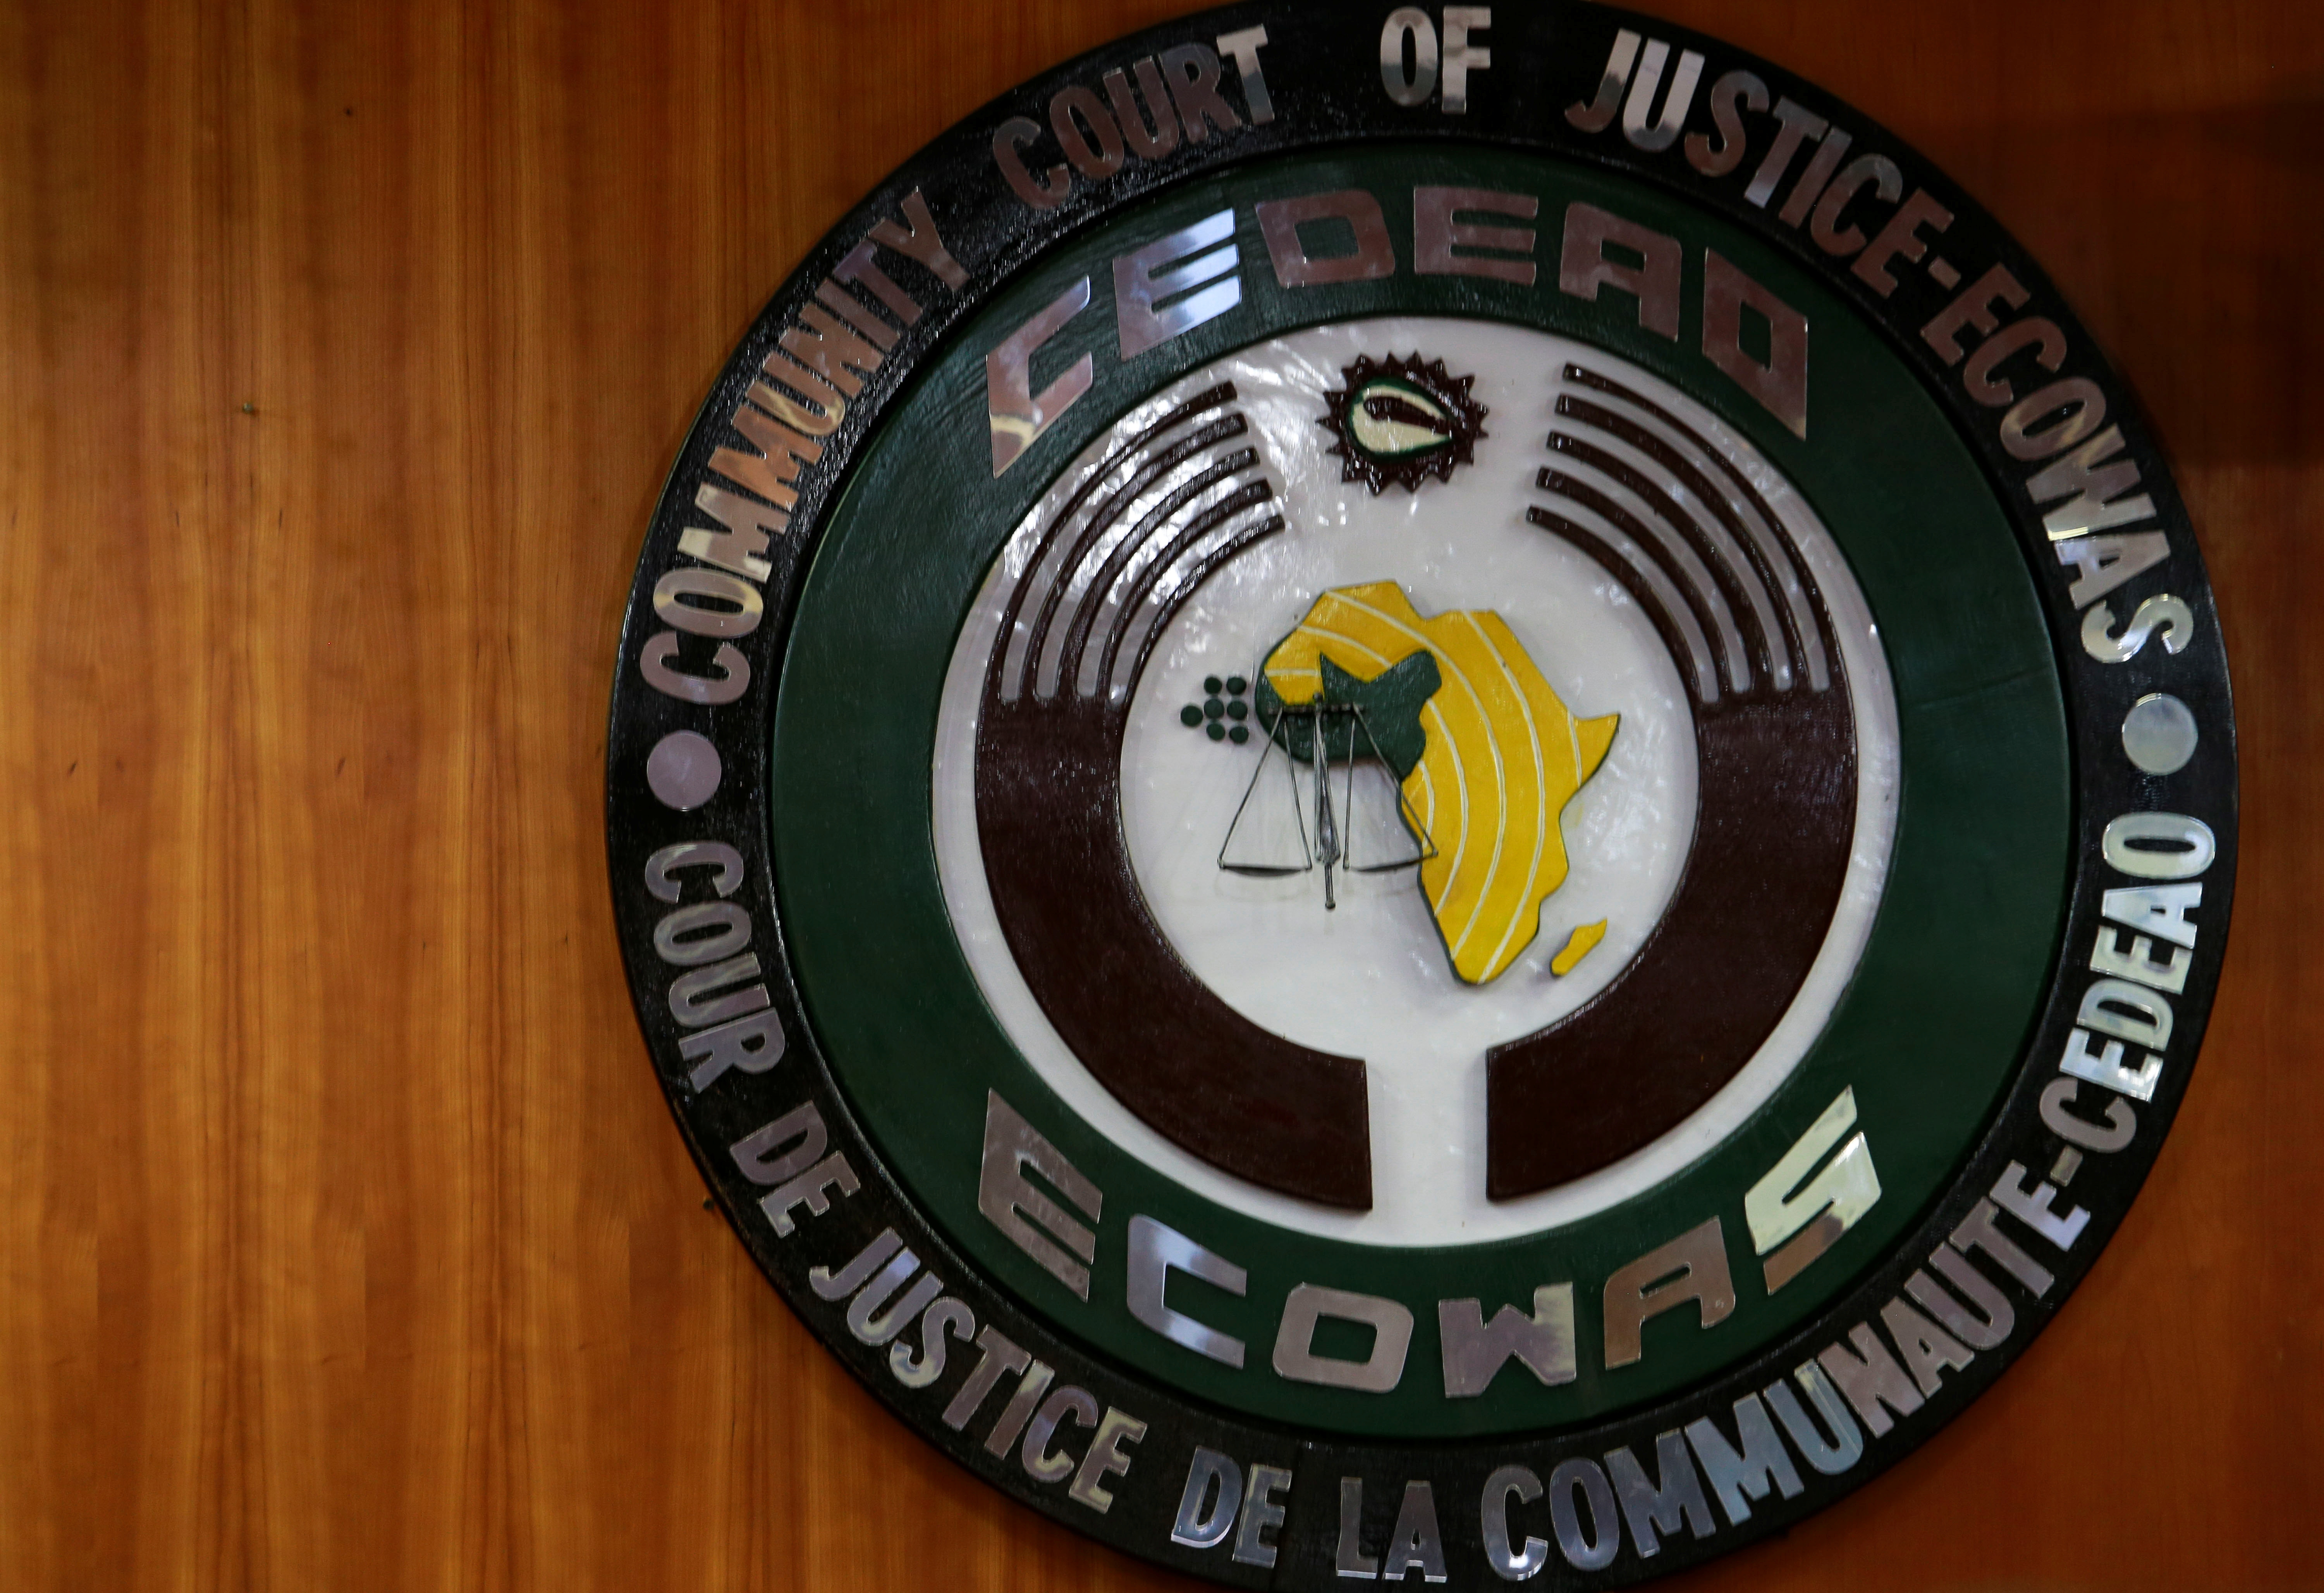 Ecowas court hearing on whether Nigeria's Twitter ban violated rights, in Abuja